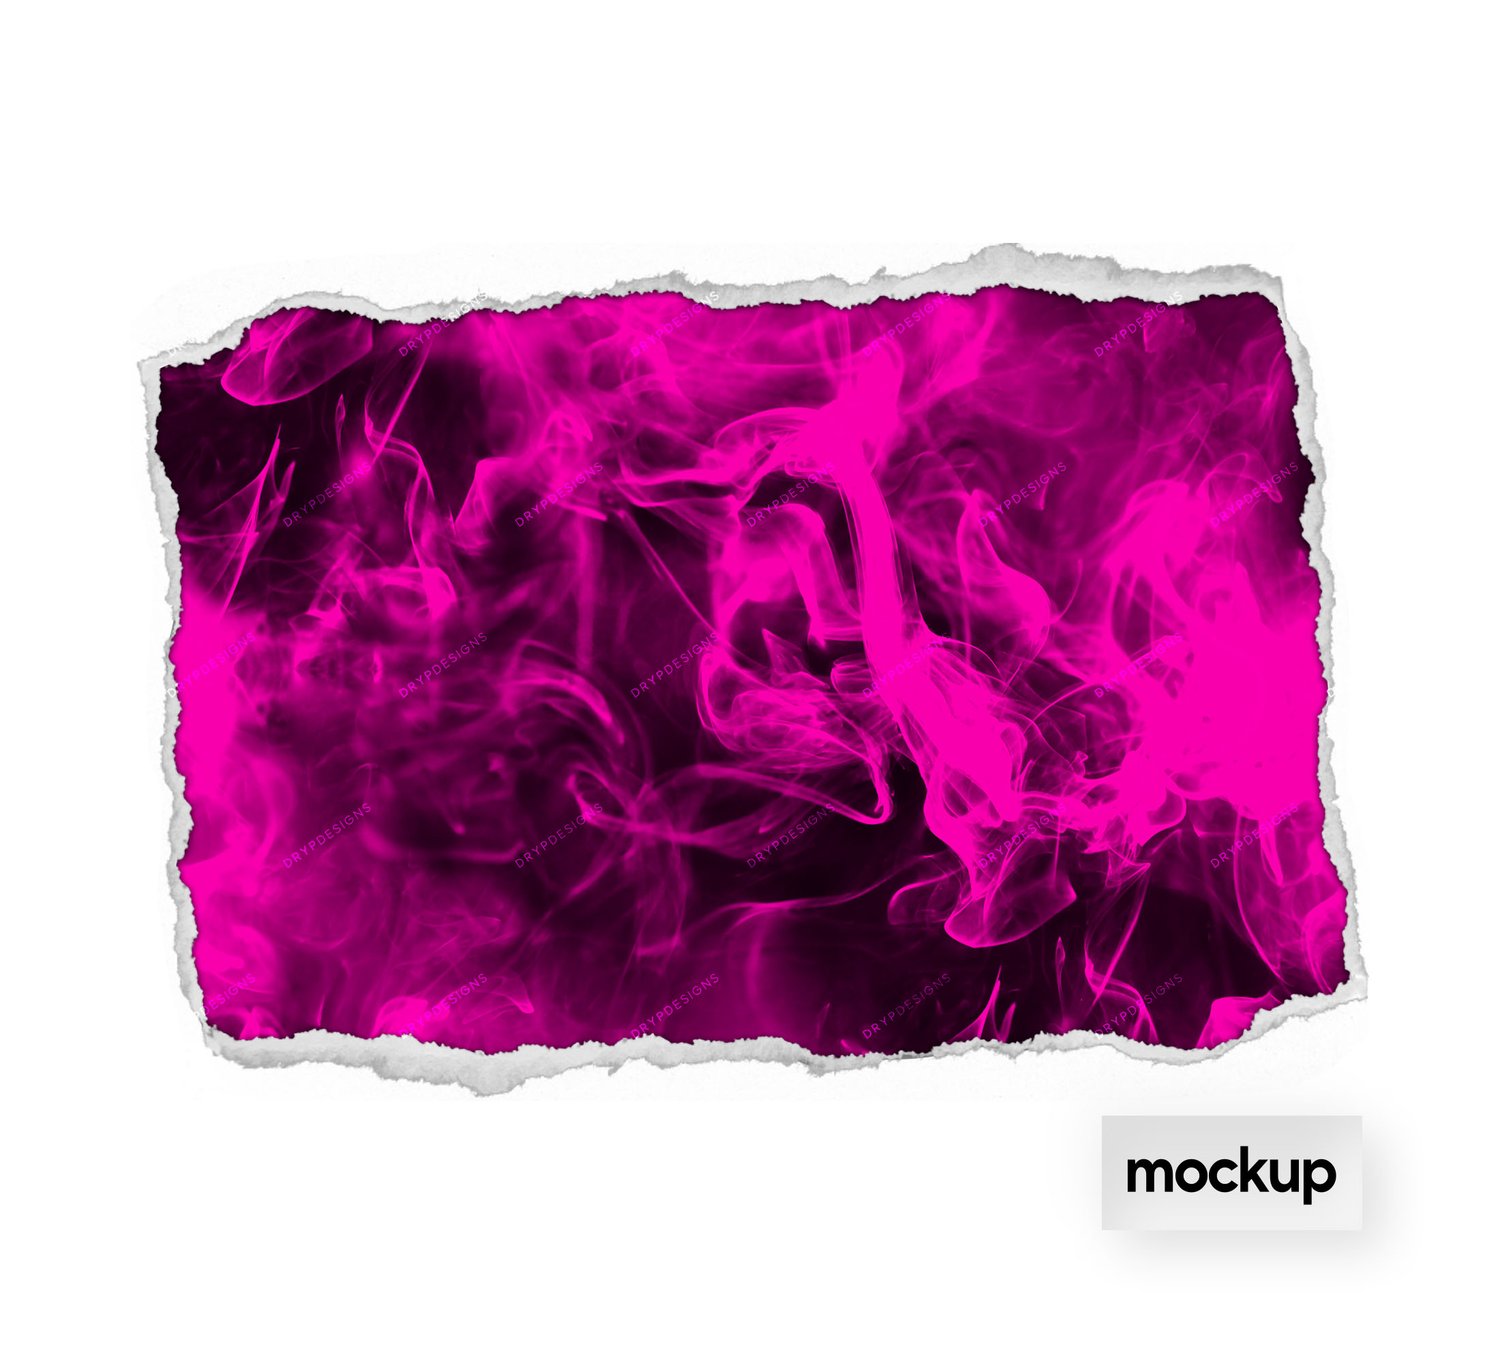 pink flames background